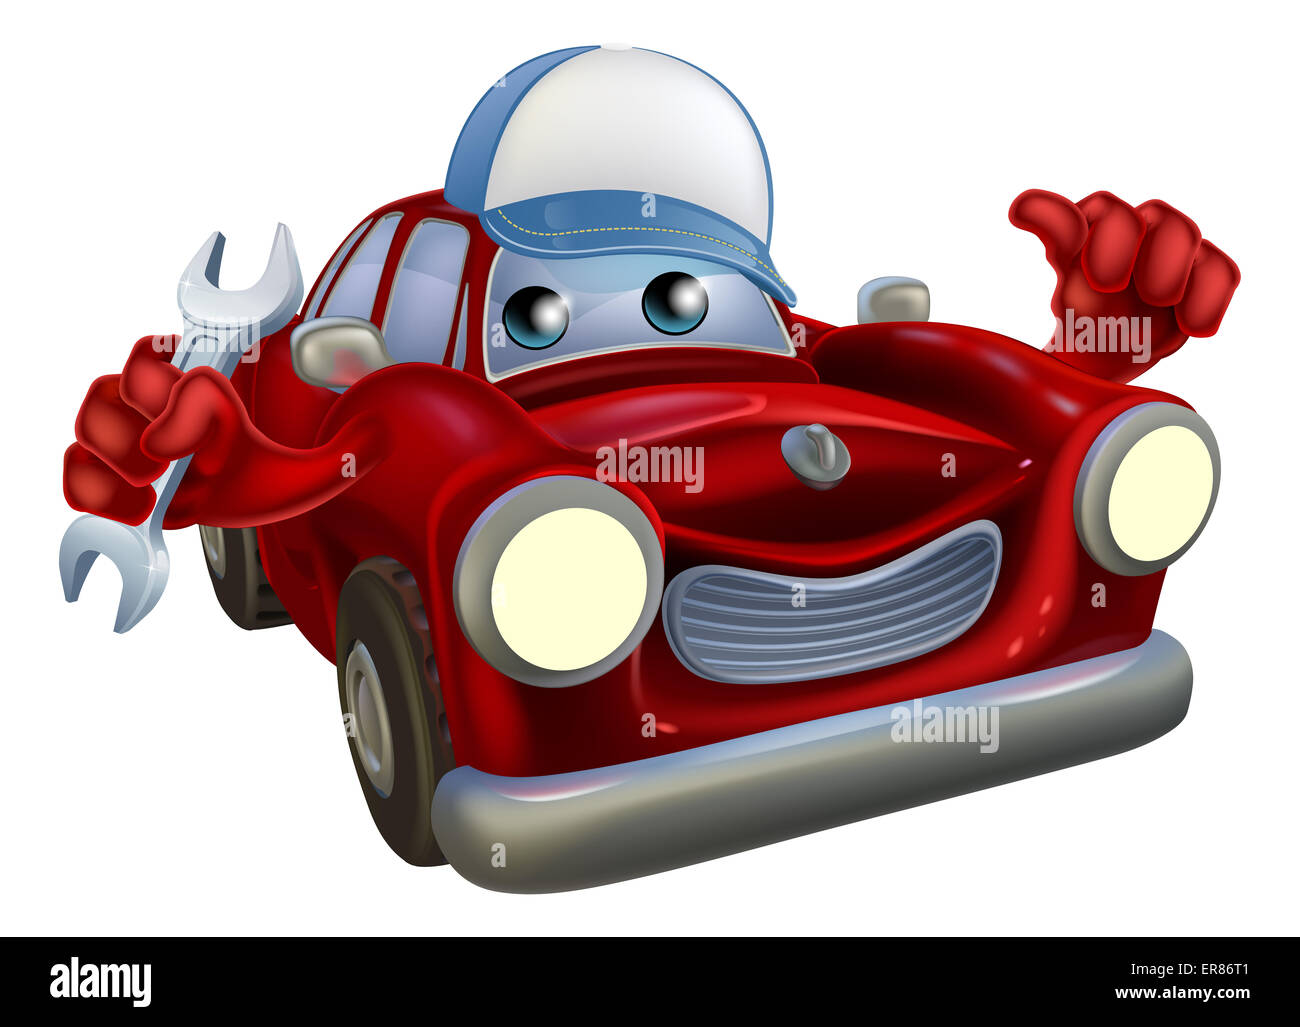 A drawing of a red cartoon car mascot wearing a baseball hat and holding a wrech while giving a thumbs up. Stock Photo